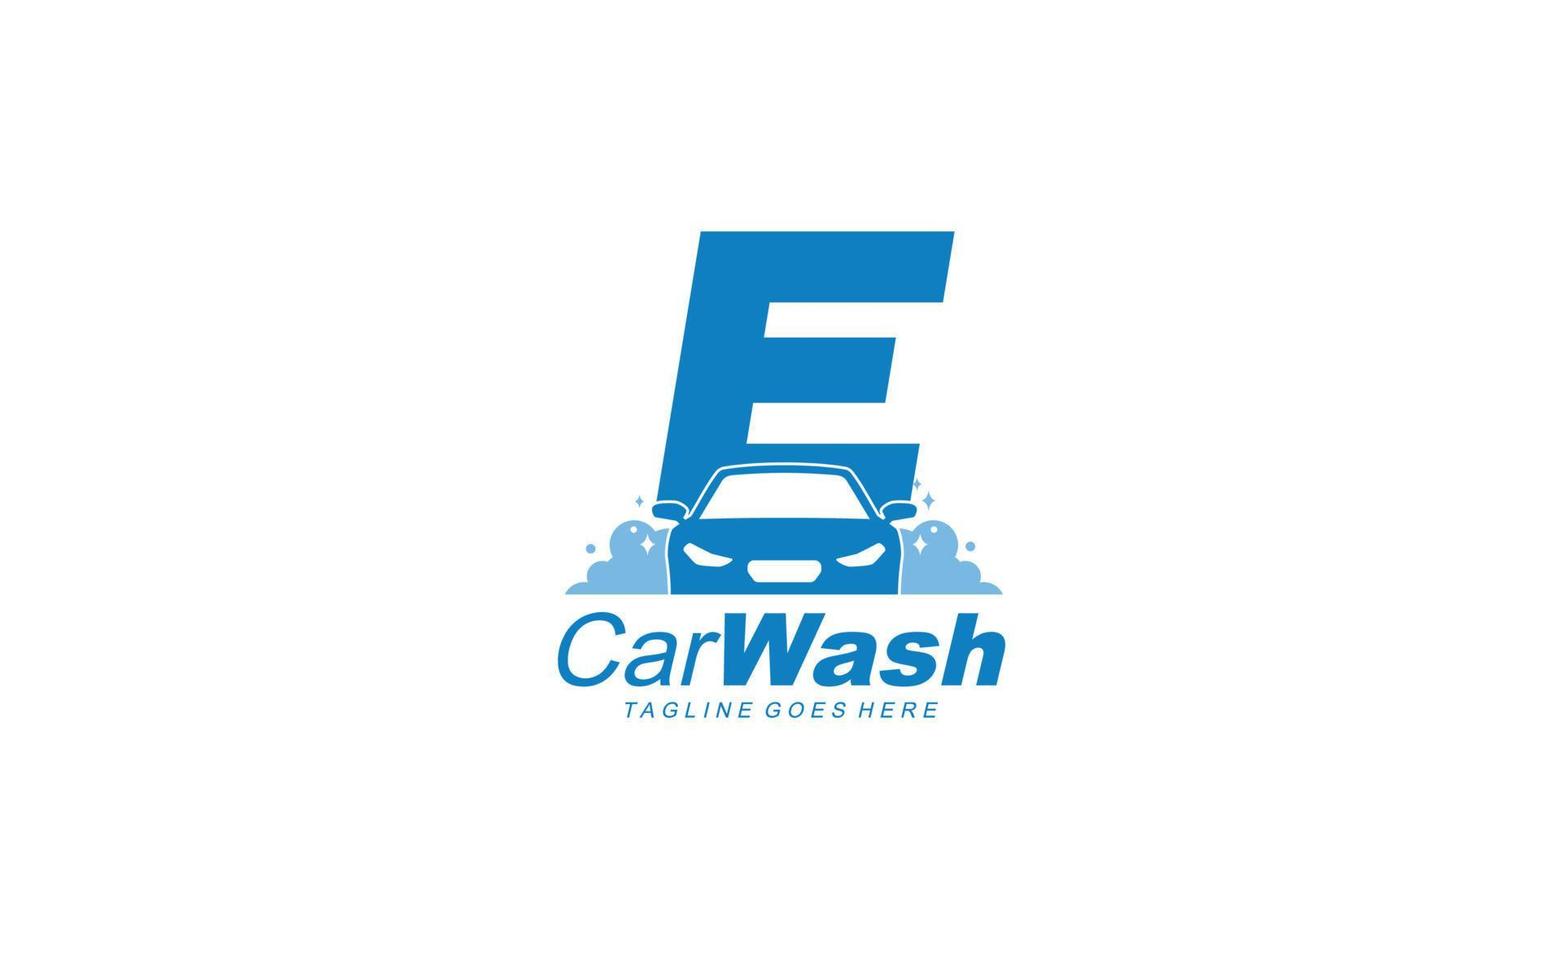 E logo carwash for identity. car template vector illustration for your brand.